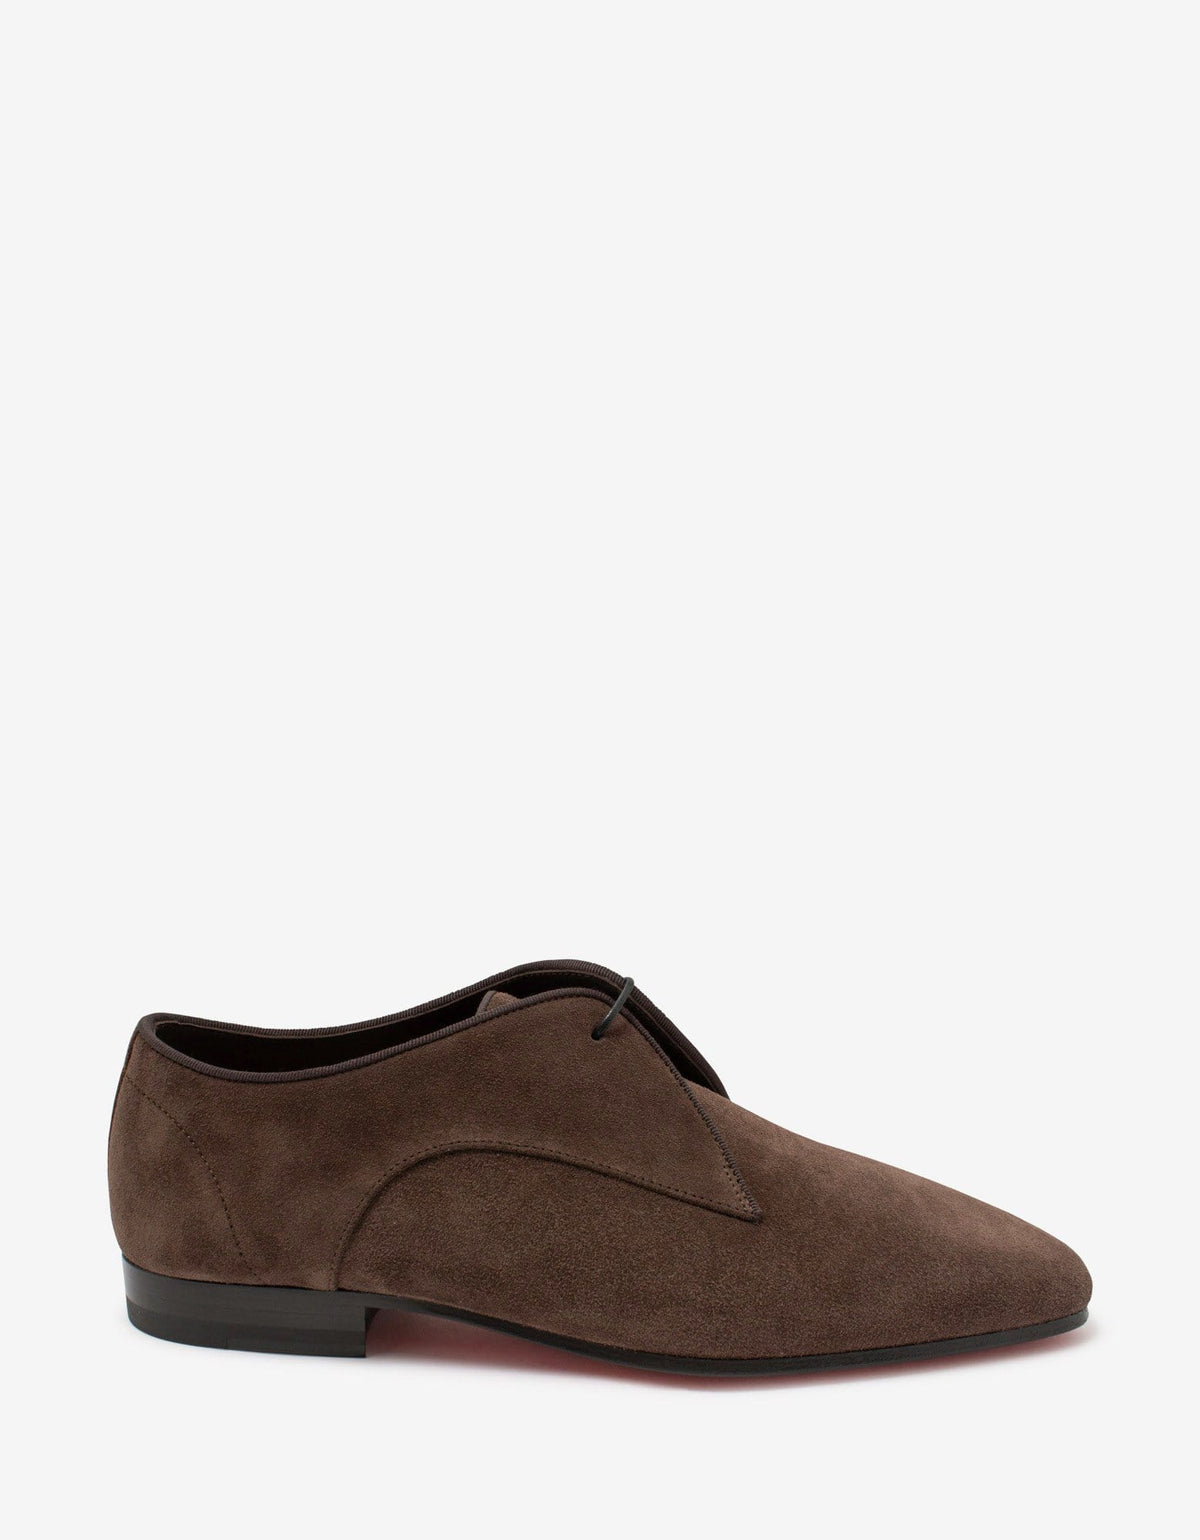 Christian Louboutin - Carderby Brown Suede Leather Shoes -